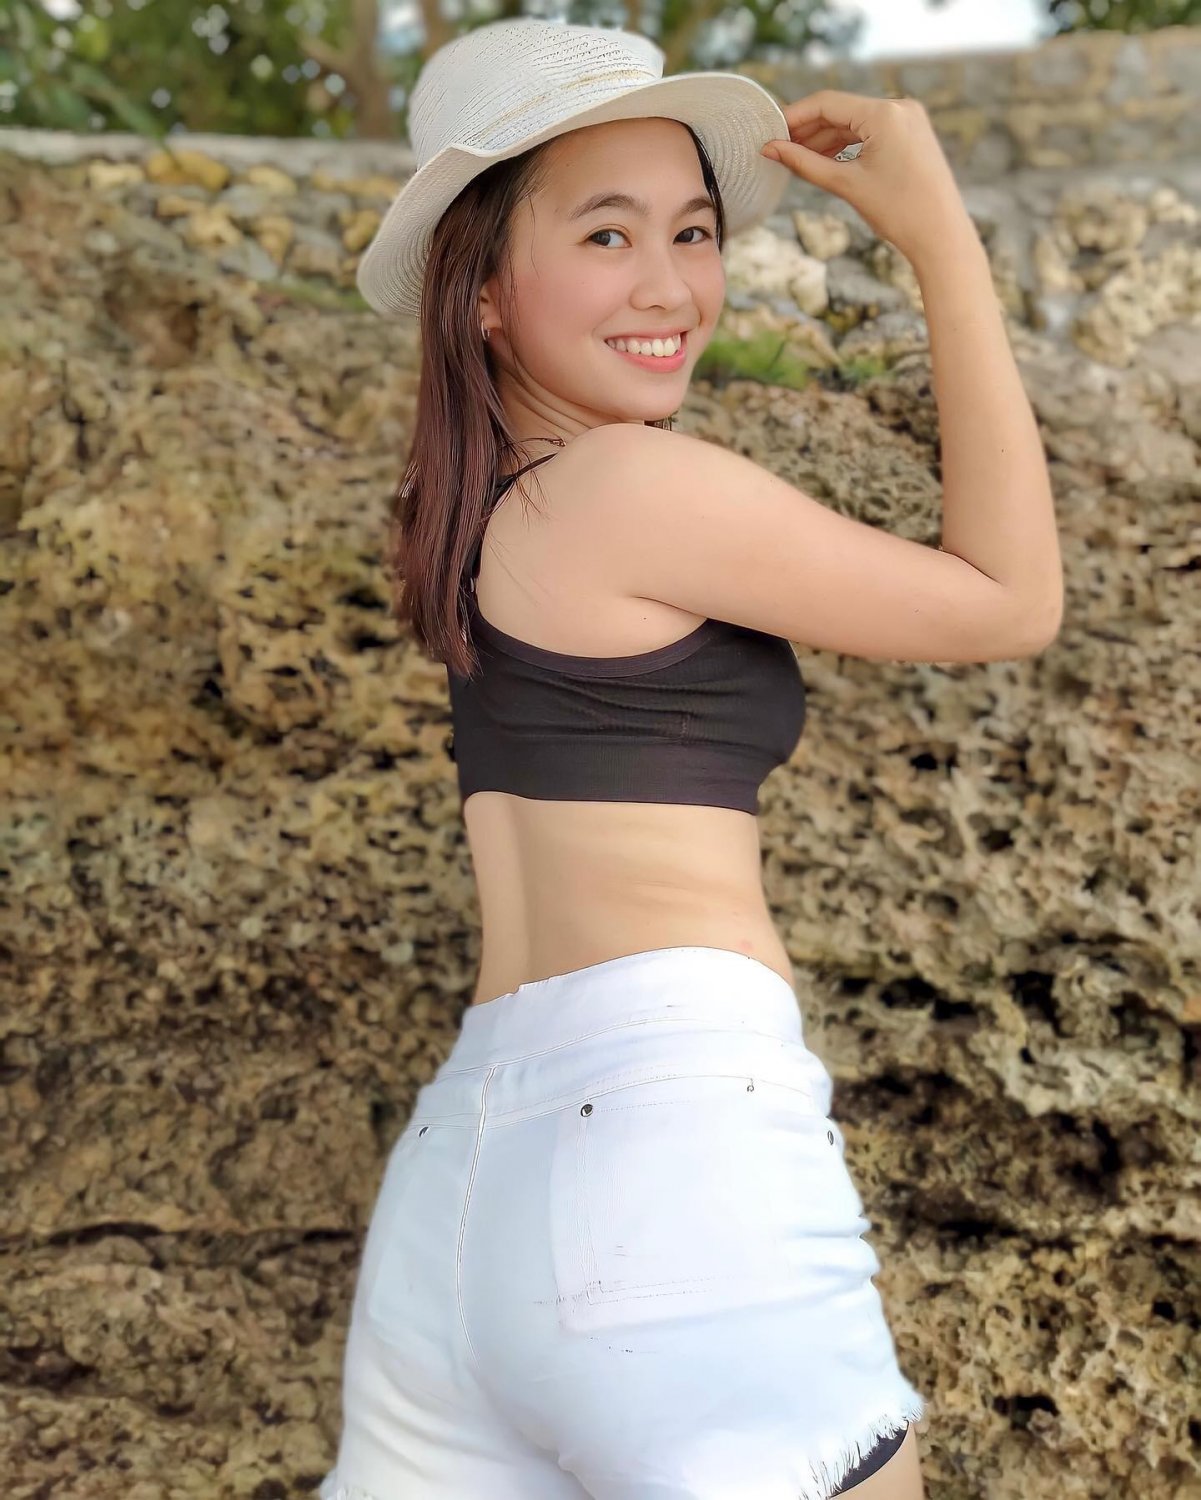 Pinay love to flaunt body and armpit #usRpZszP